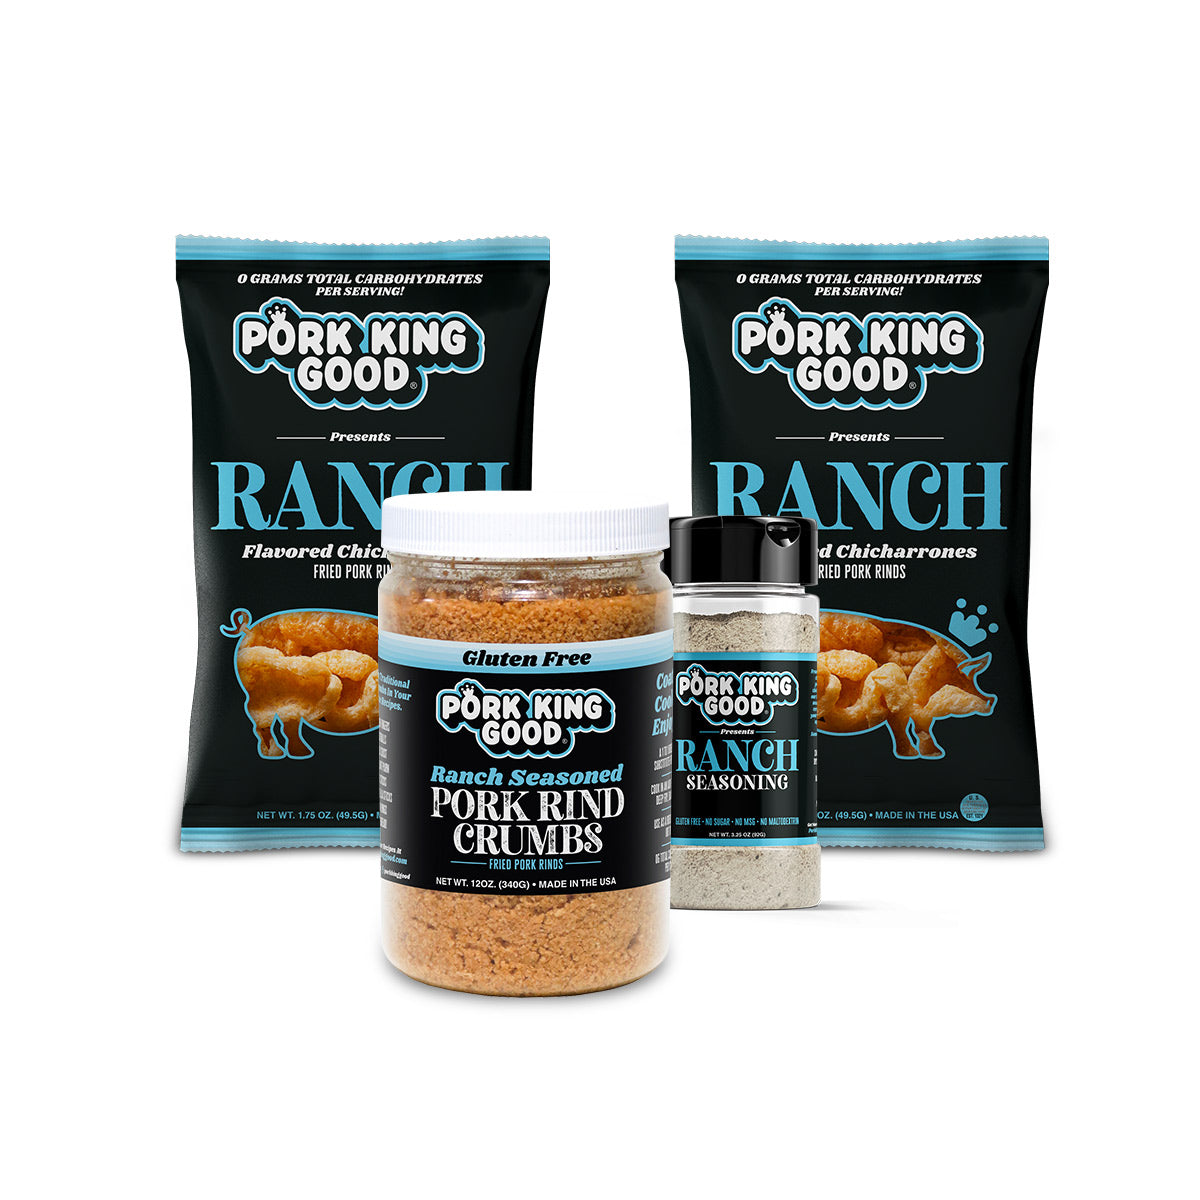 Pork King Good Expands Product Line with 7 Oz. Party Size Pork Rinds